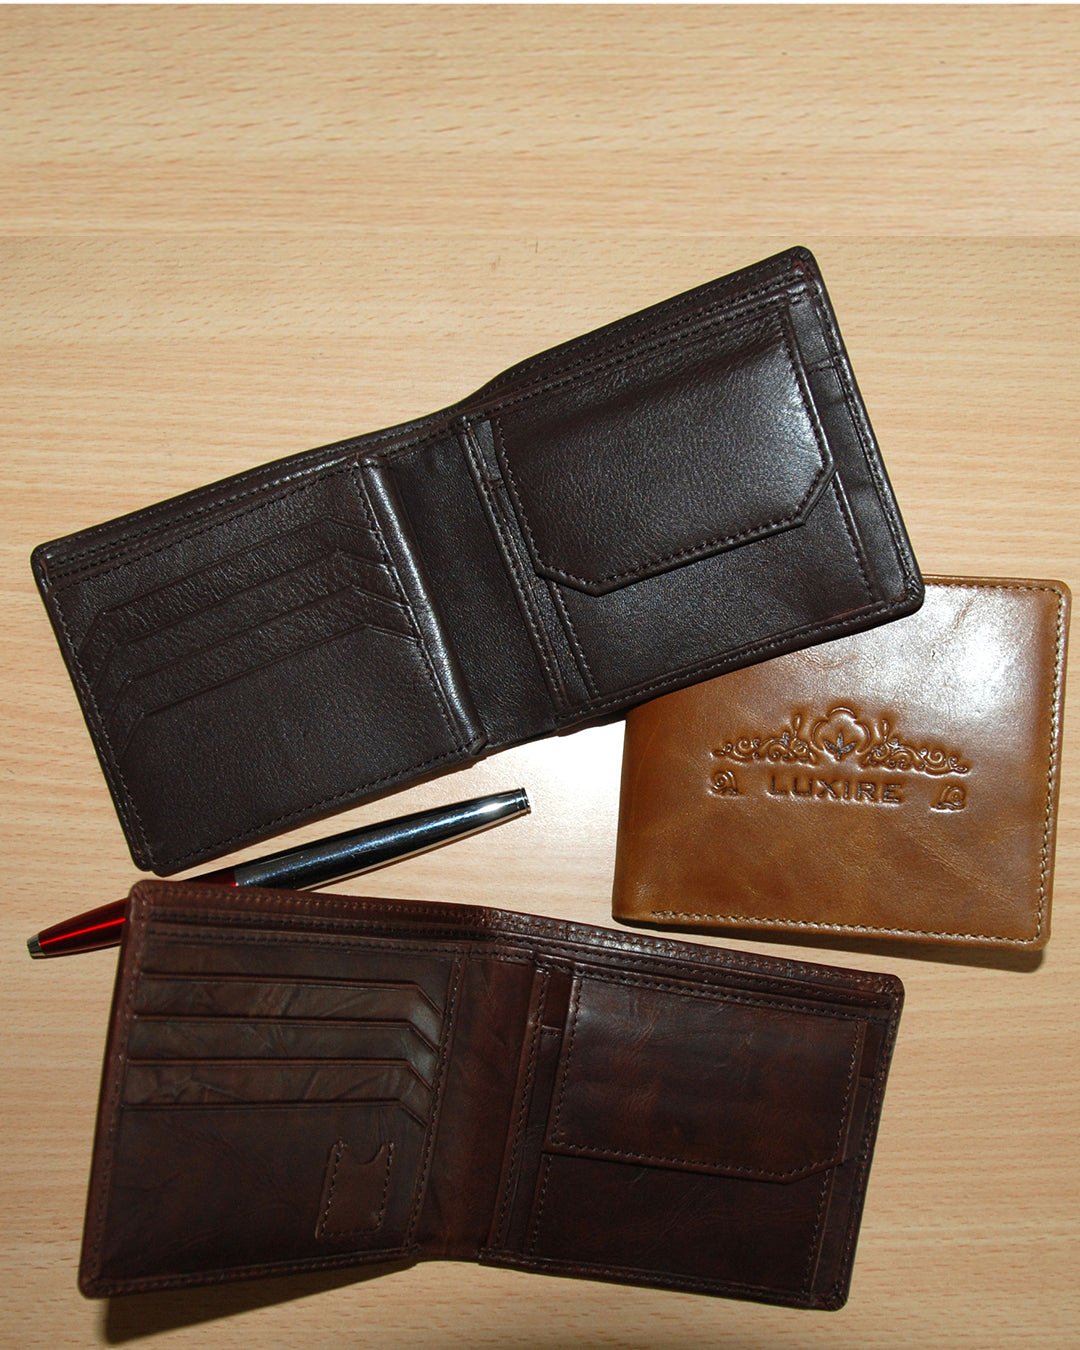 Luxire Leather Wallet 2013 Collection